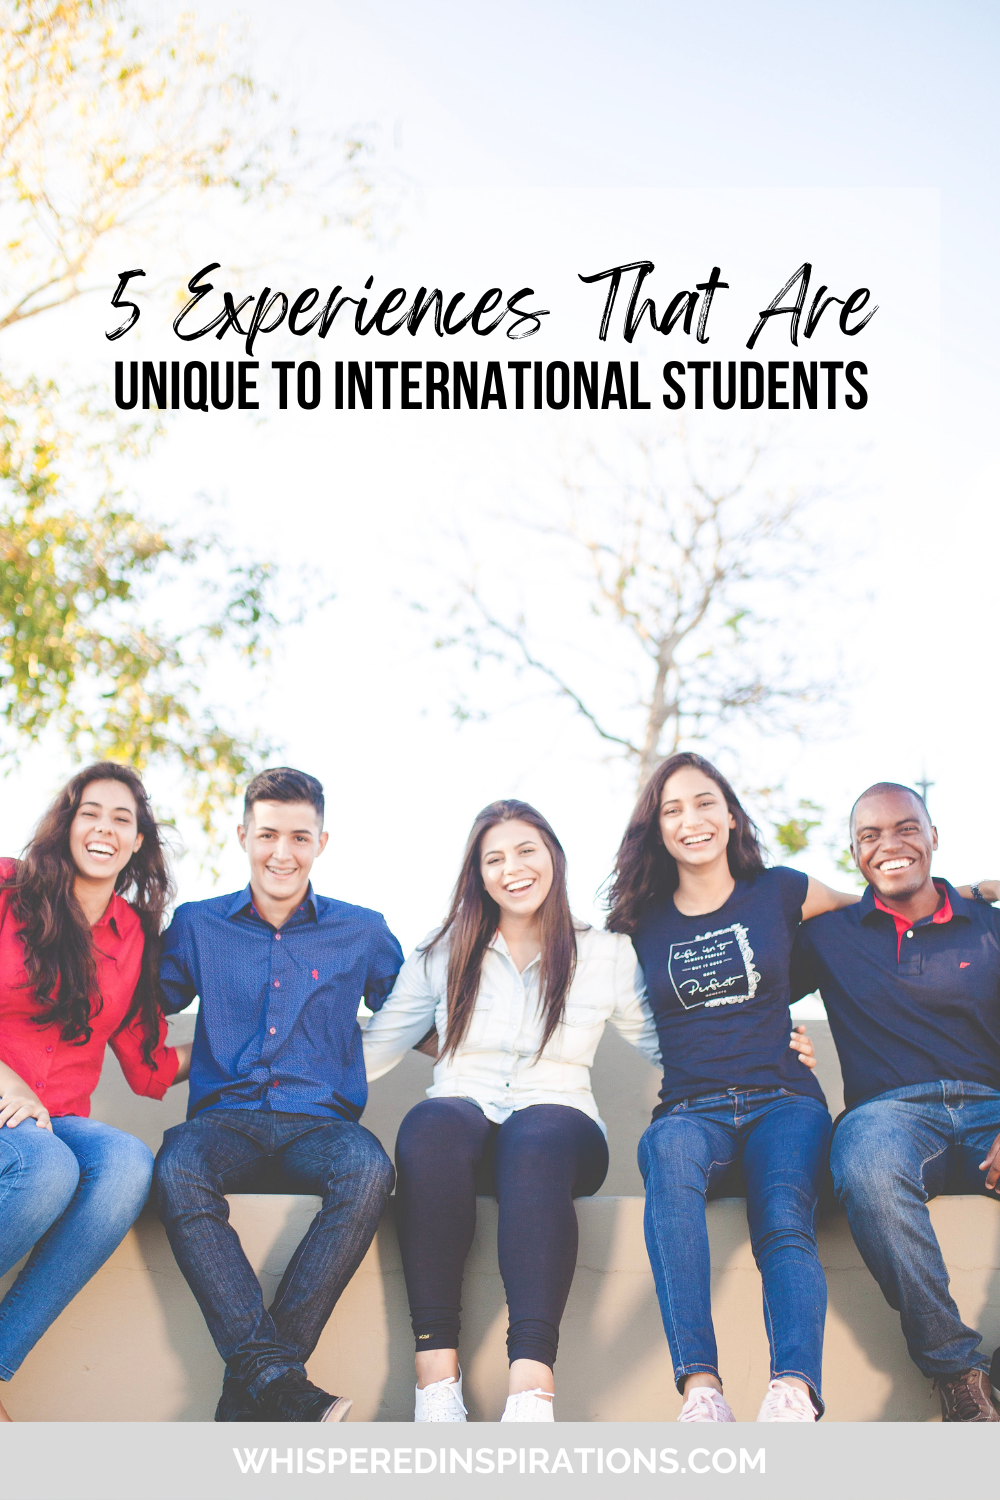 A group of students sit together and smile at the camera. They are seated outdoors of a school campus. This article covers experiences unique to international high school students.